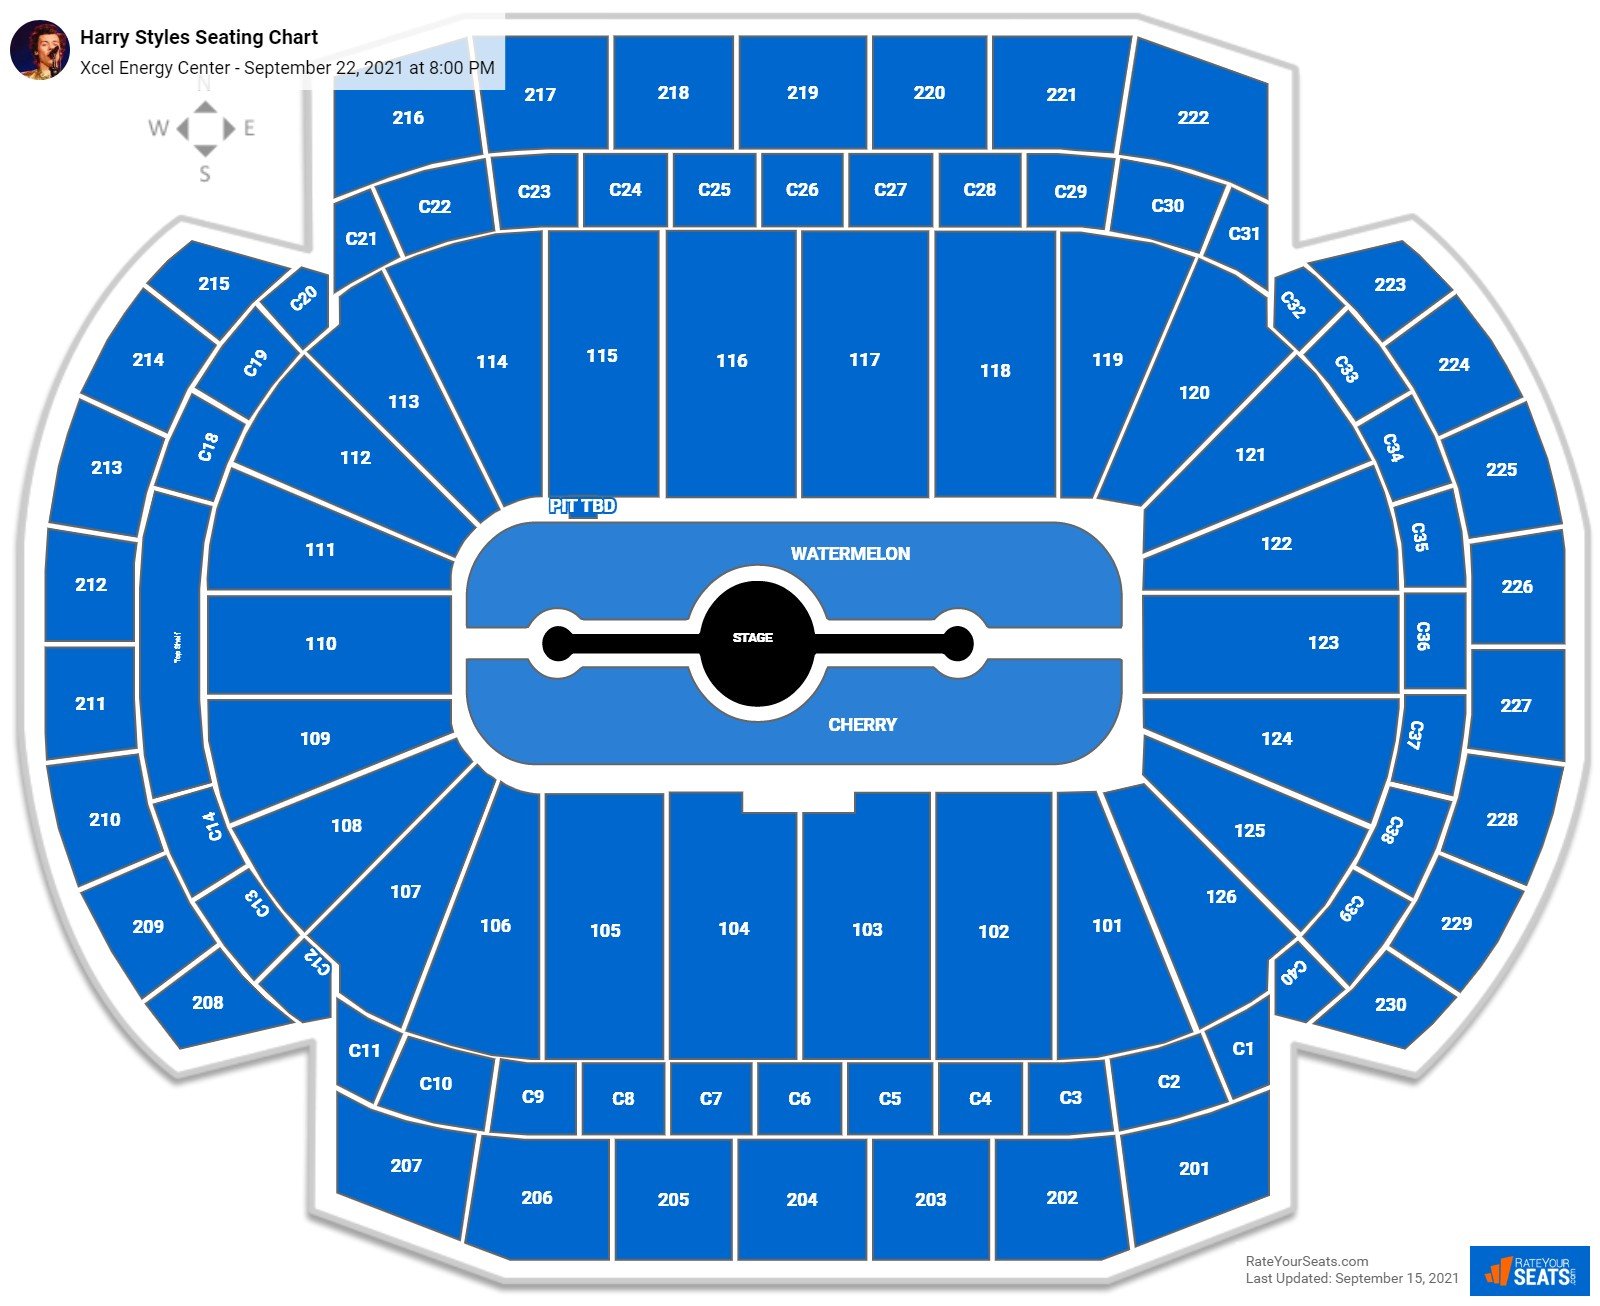 Xcel Energy Center Seating Charts for Concerts